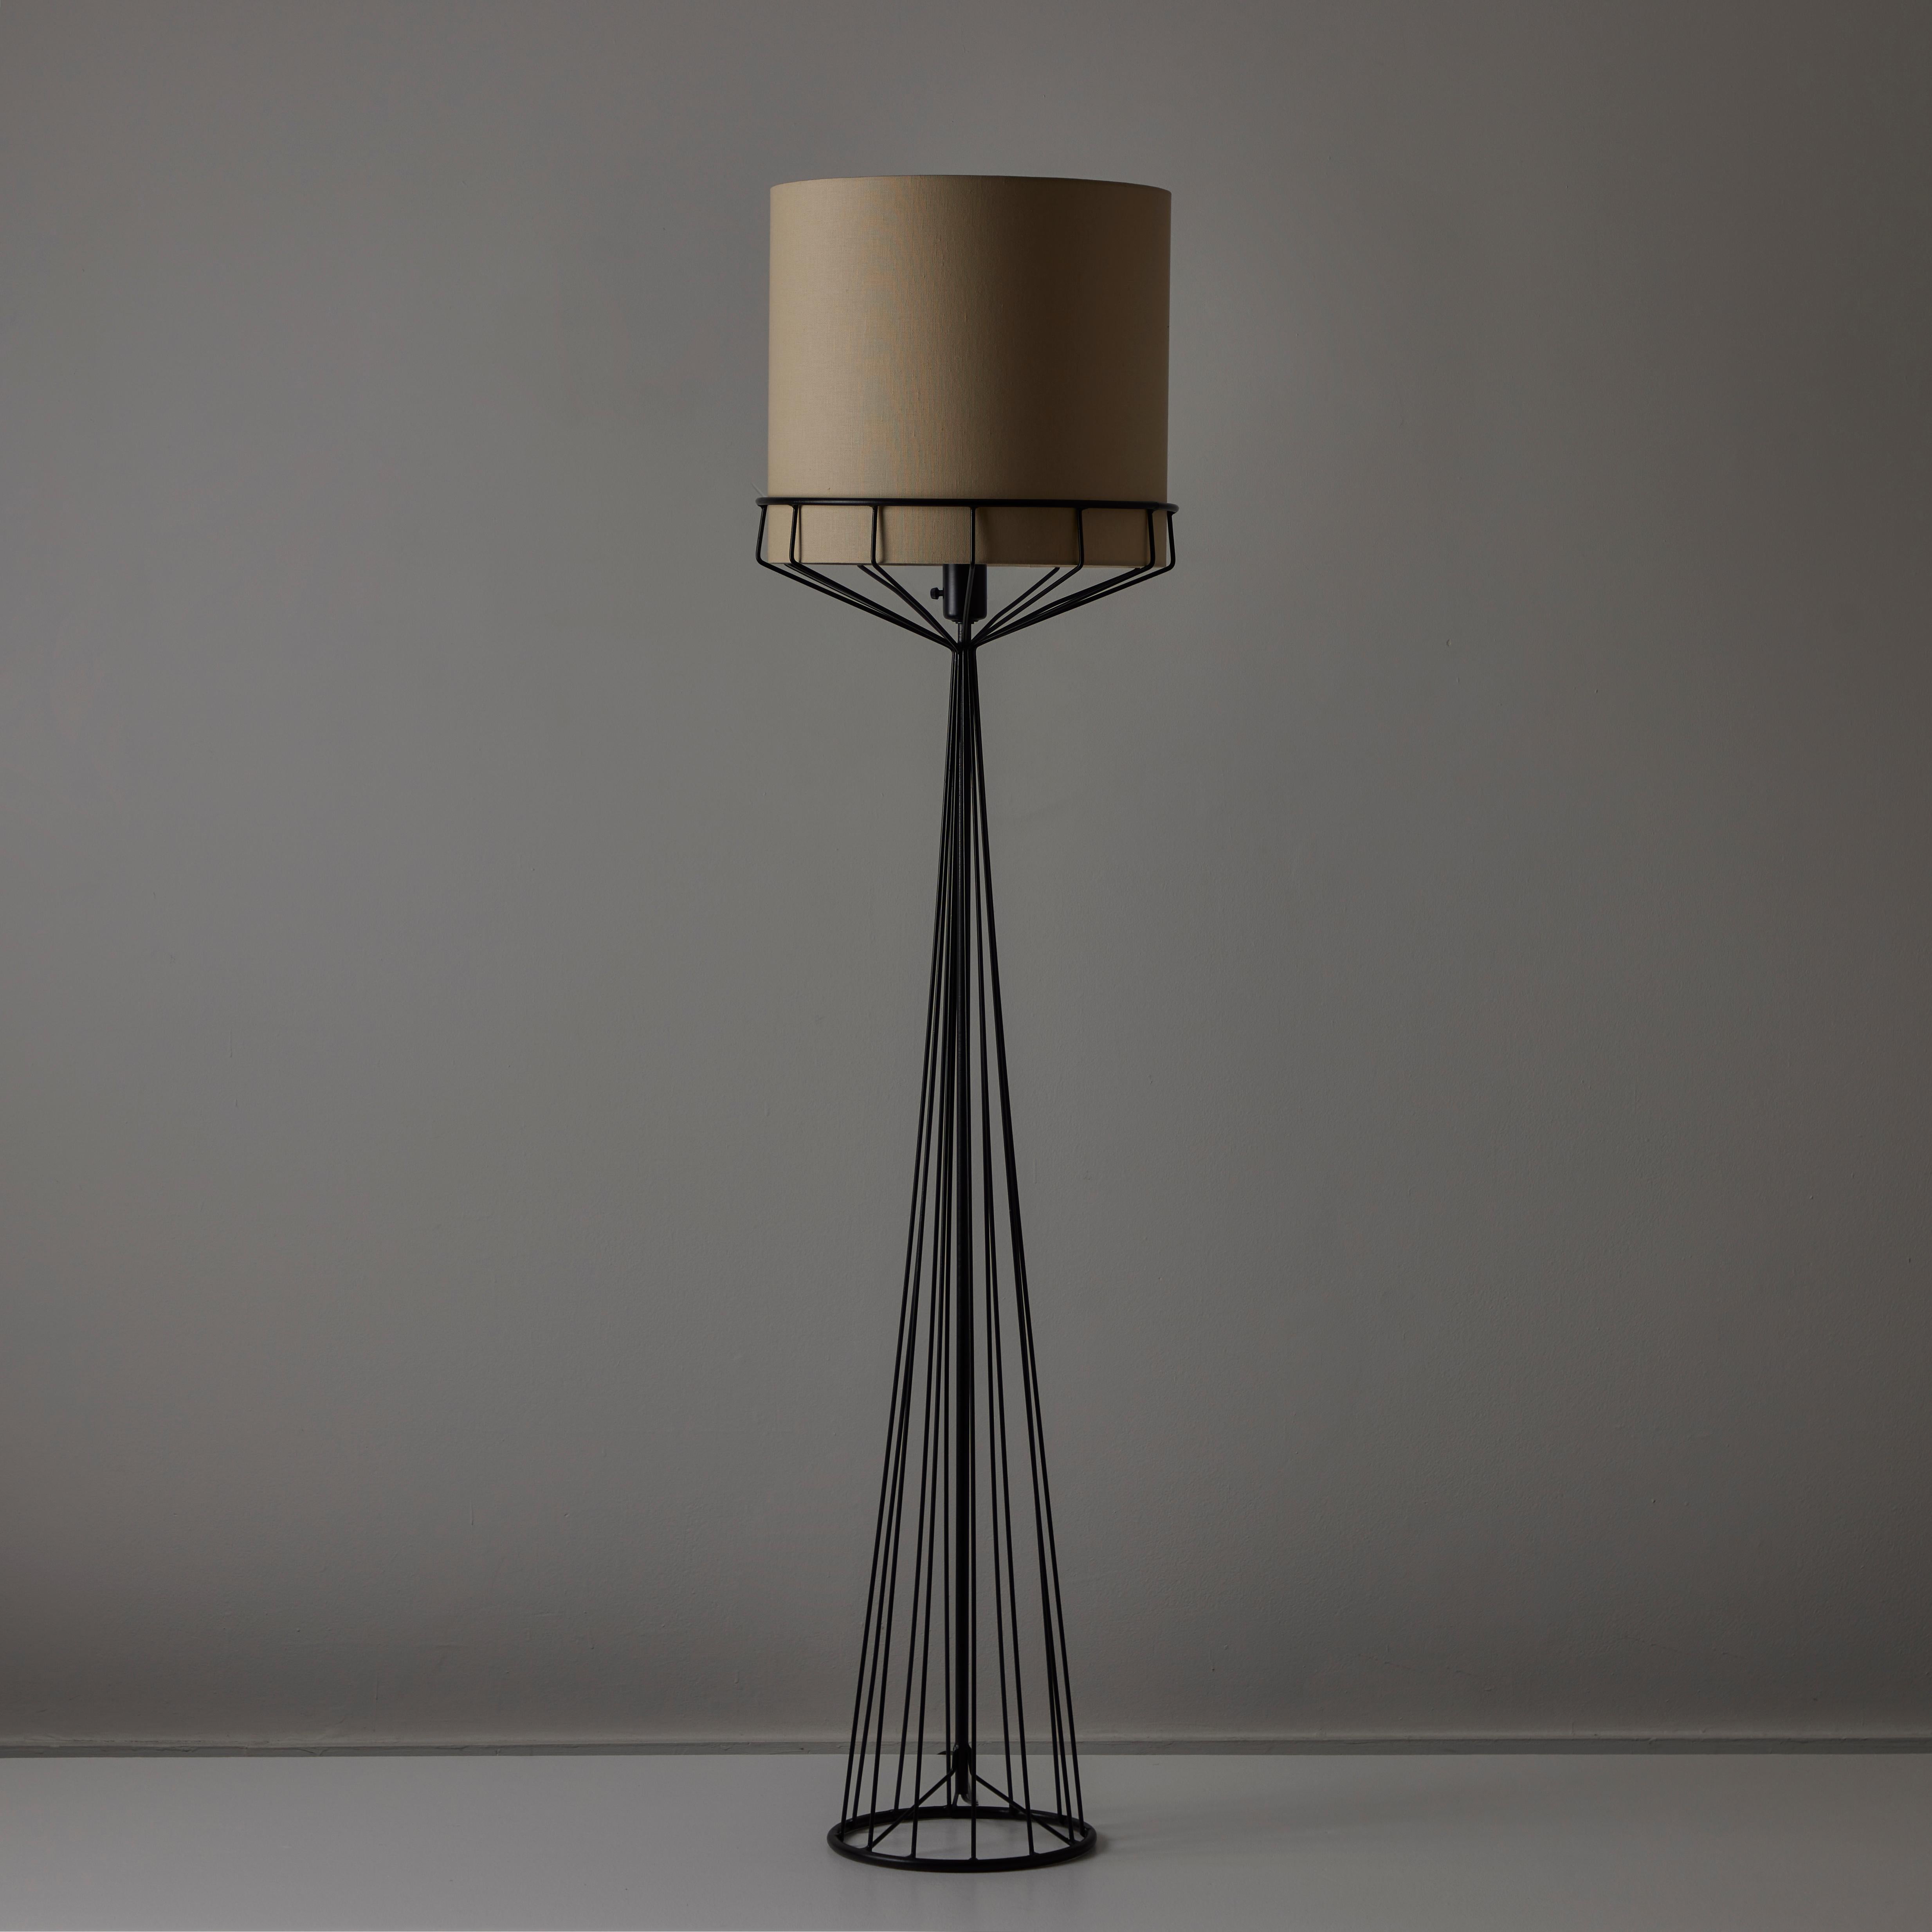 American Floor Lamp by Tony Paul for The Elton Company 